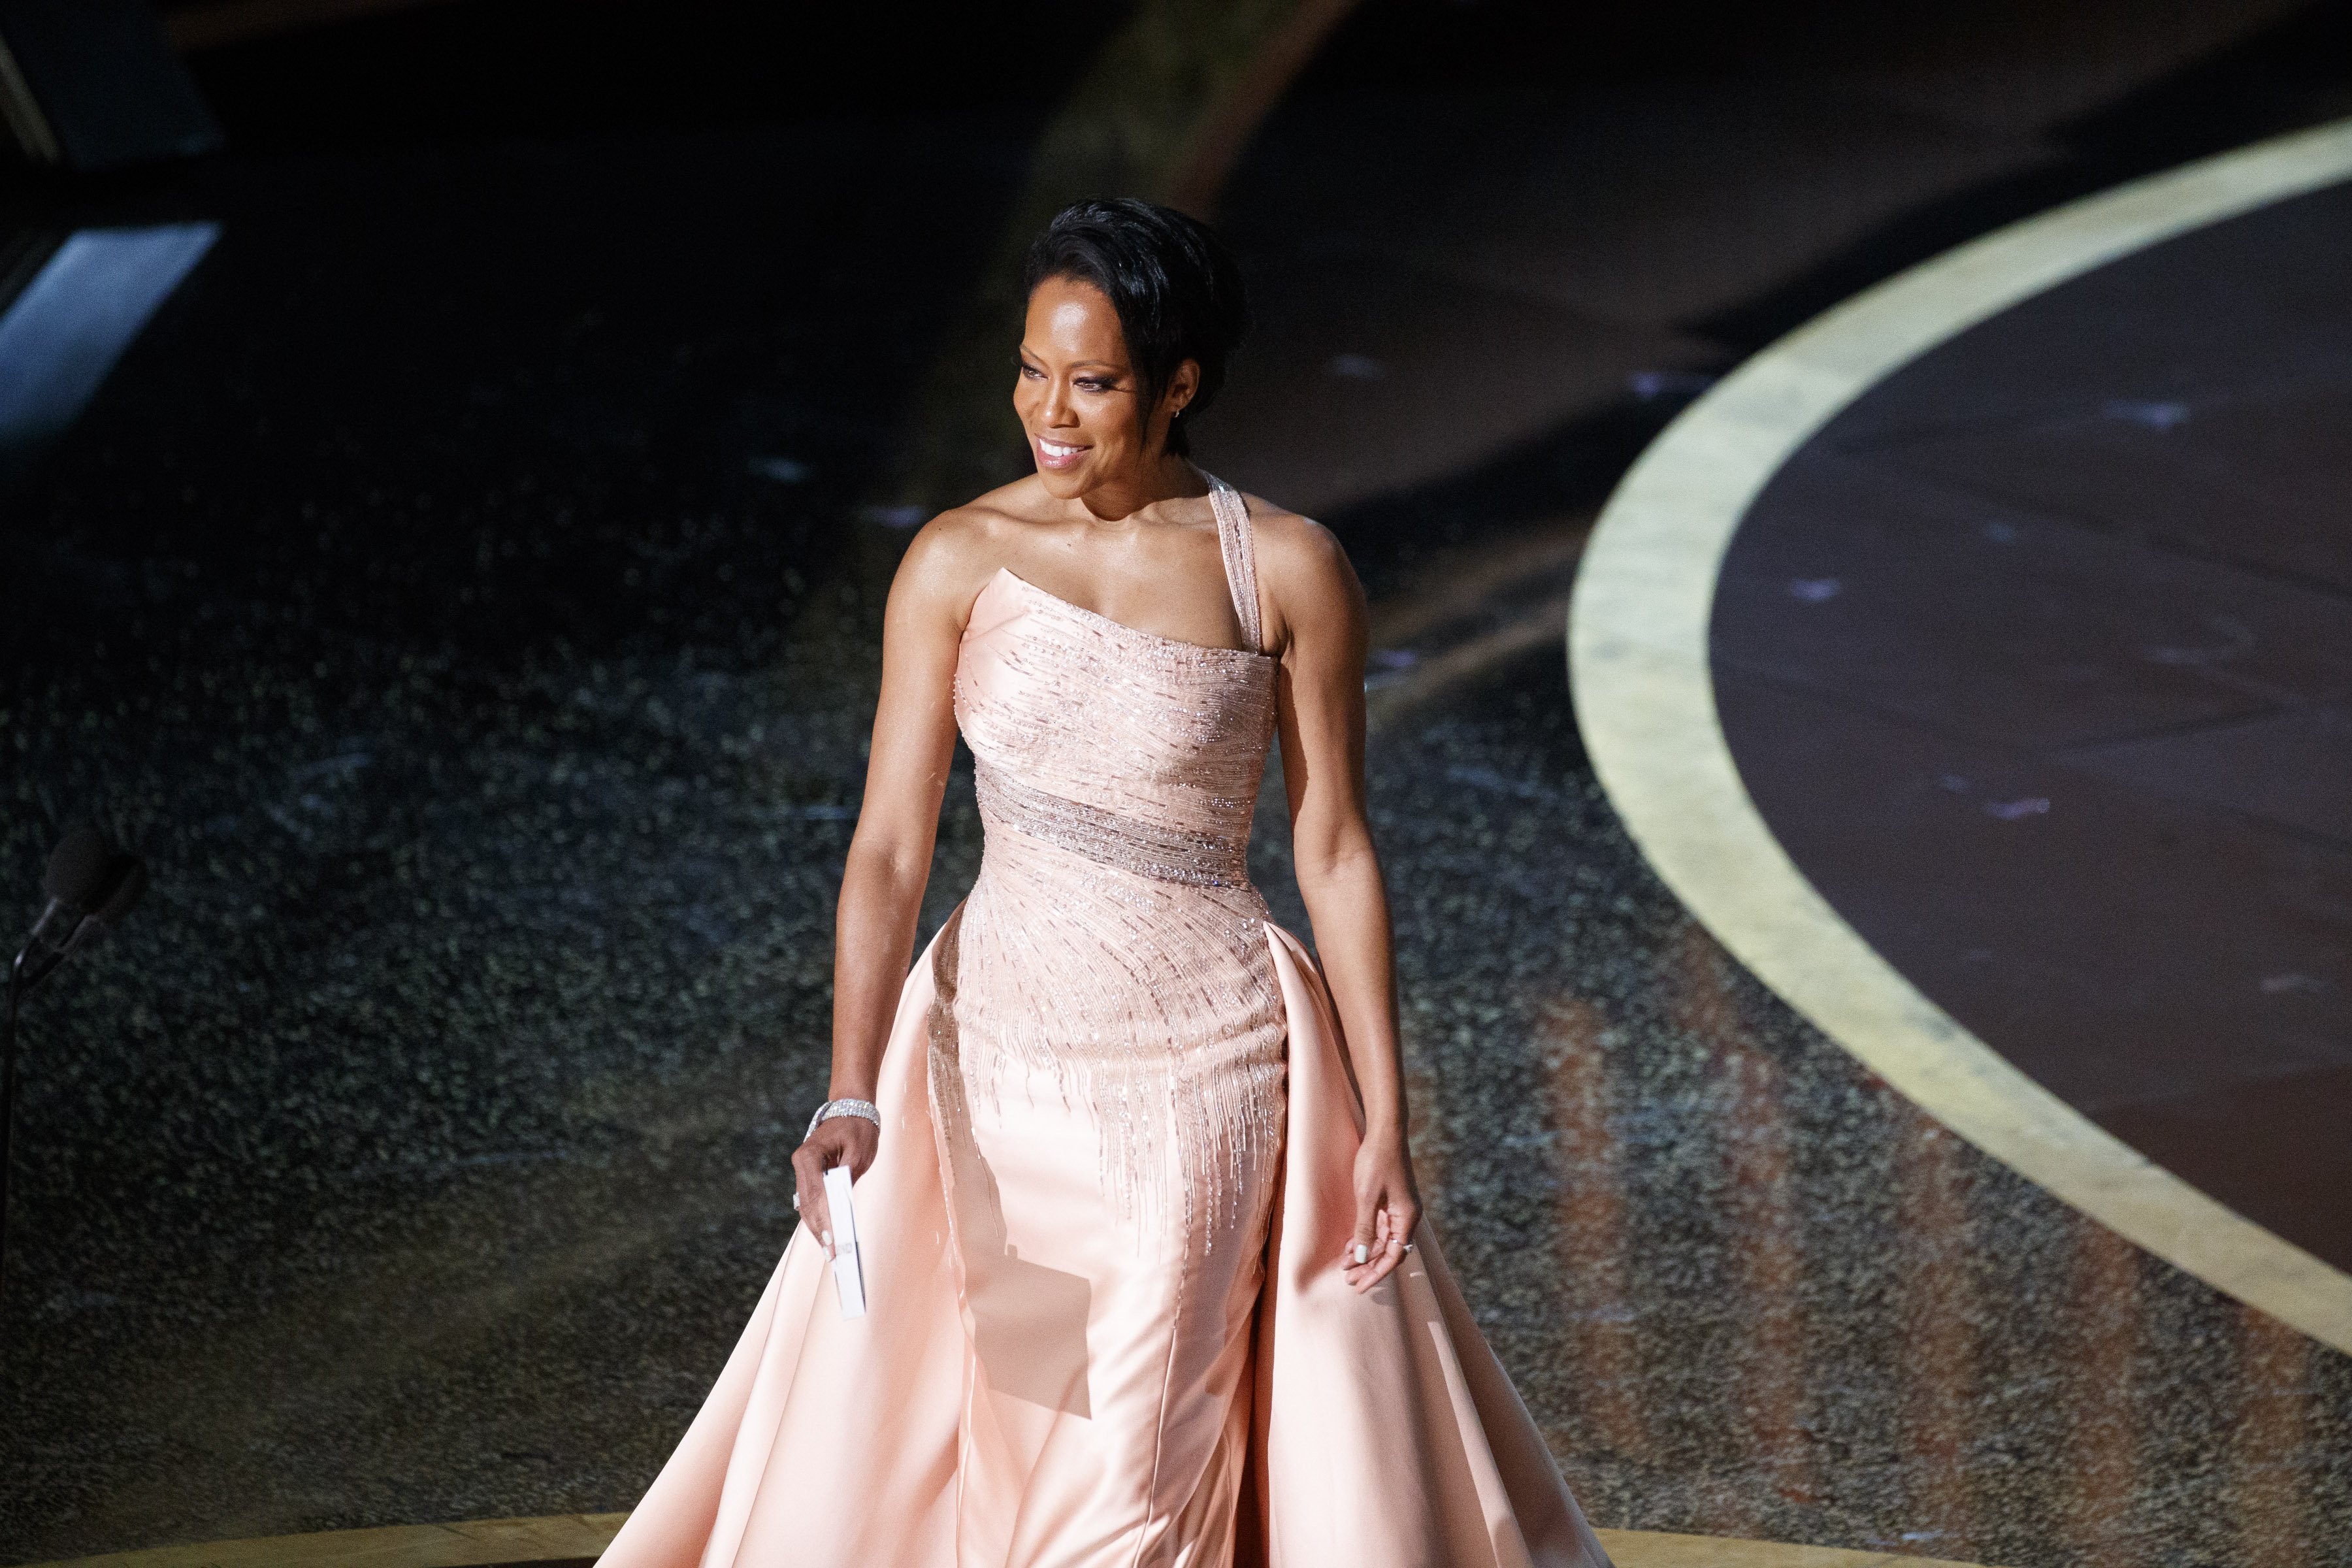 Regina King on stage to present an award at the 92nd Annual Academy Awards on February 9, 2020. | Photo: Getty Images